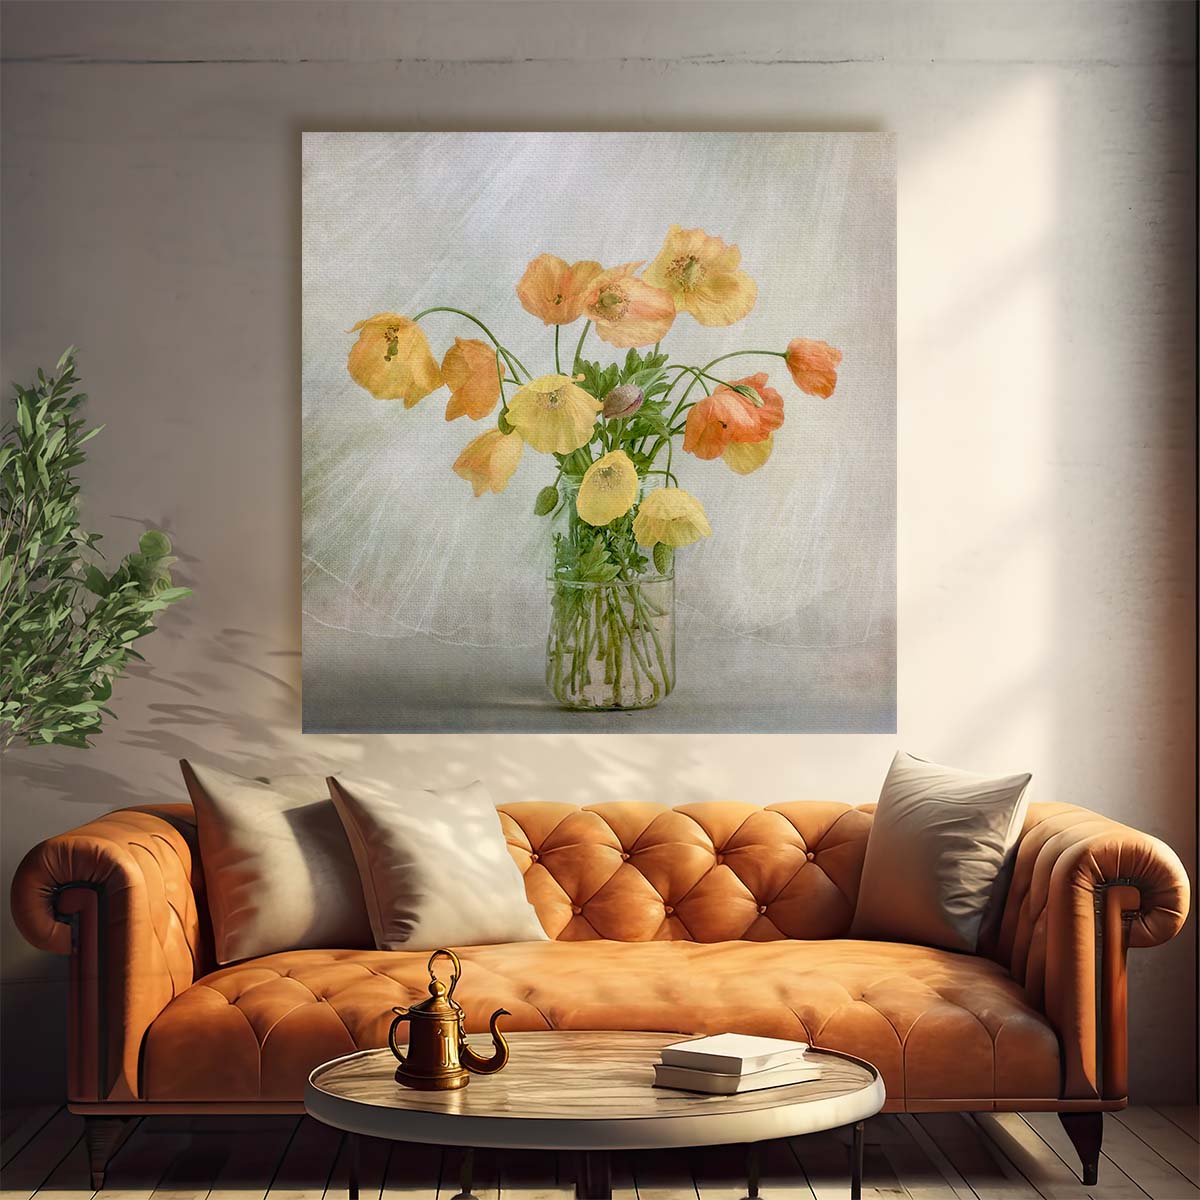 Summer Poppies in Vase A UK Floral Still Life Photography Wall Art by Luxuriance Designs. Made in USA.